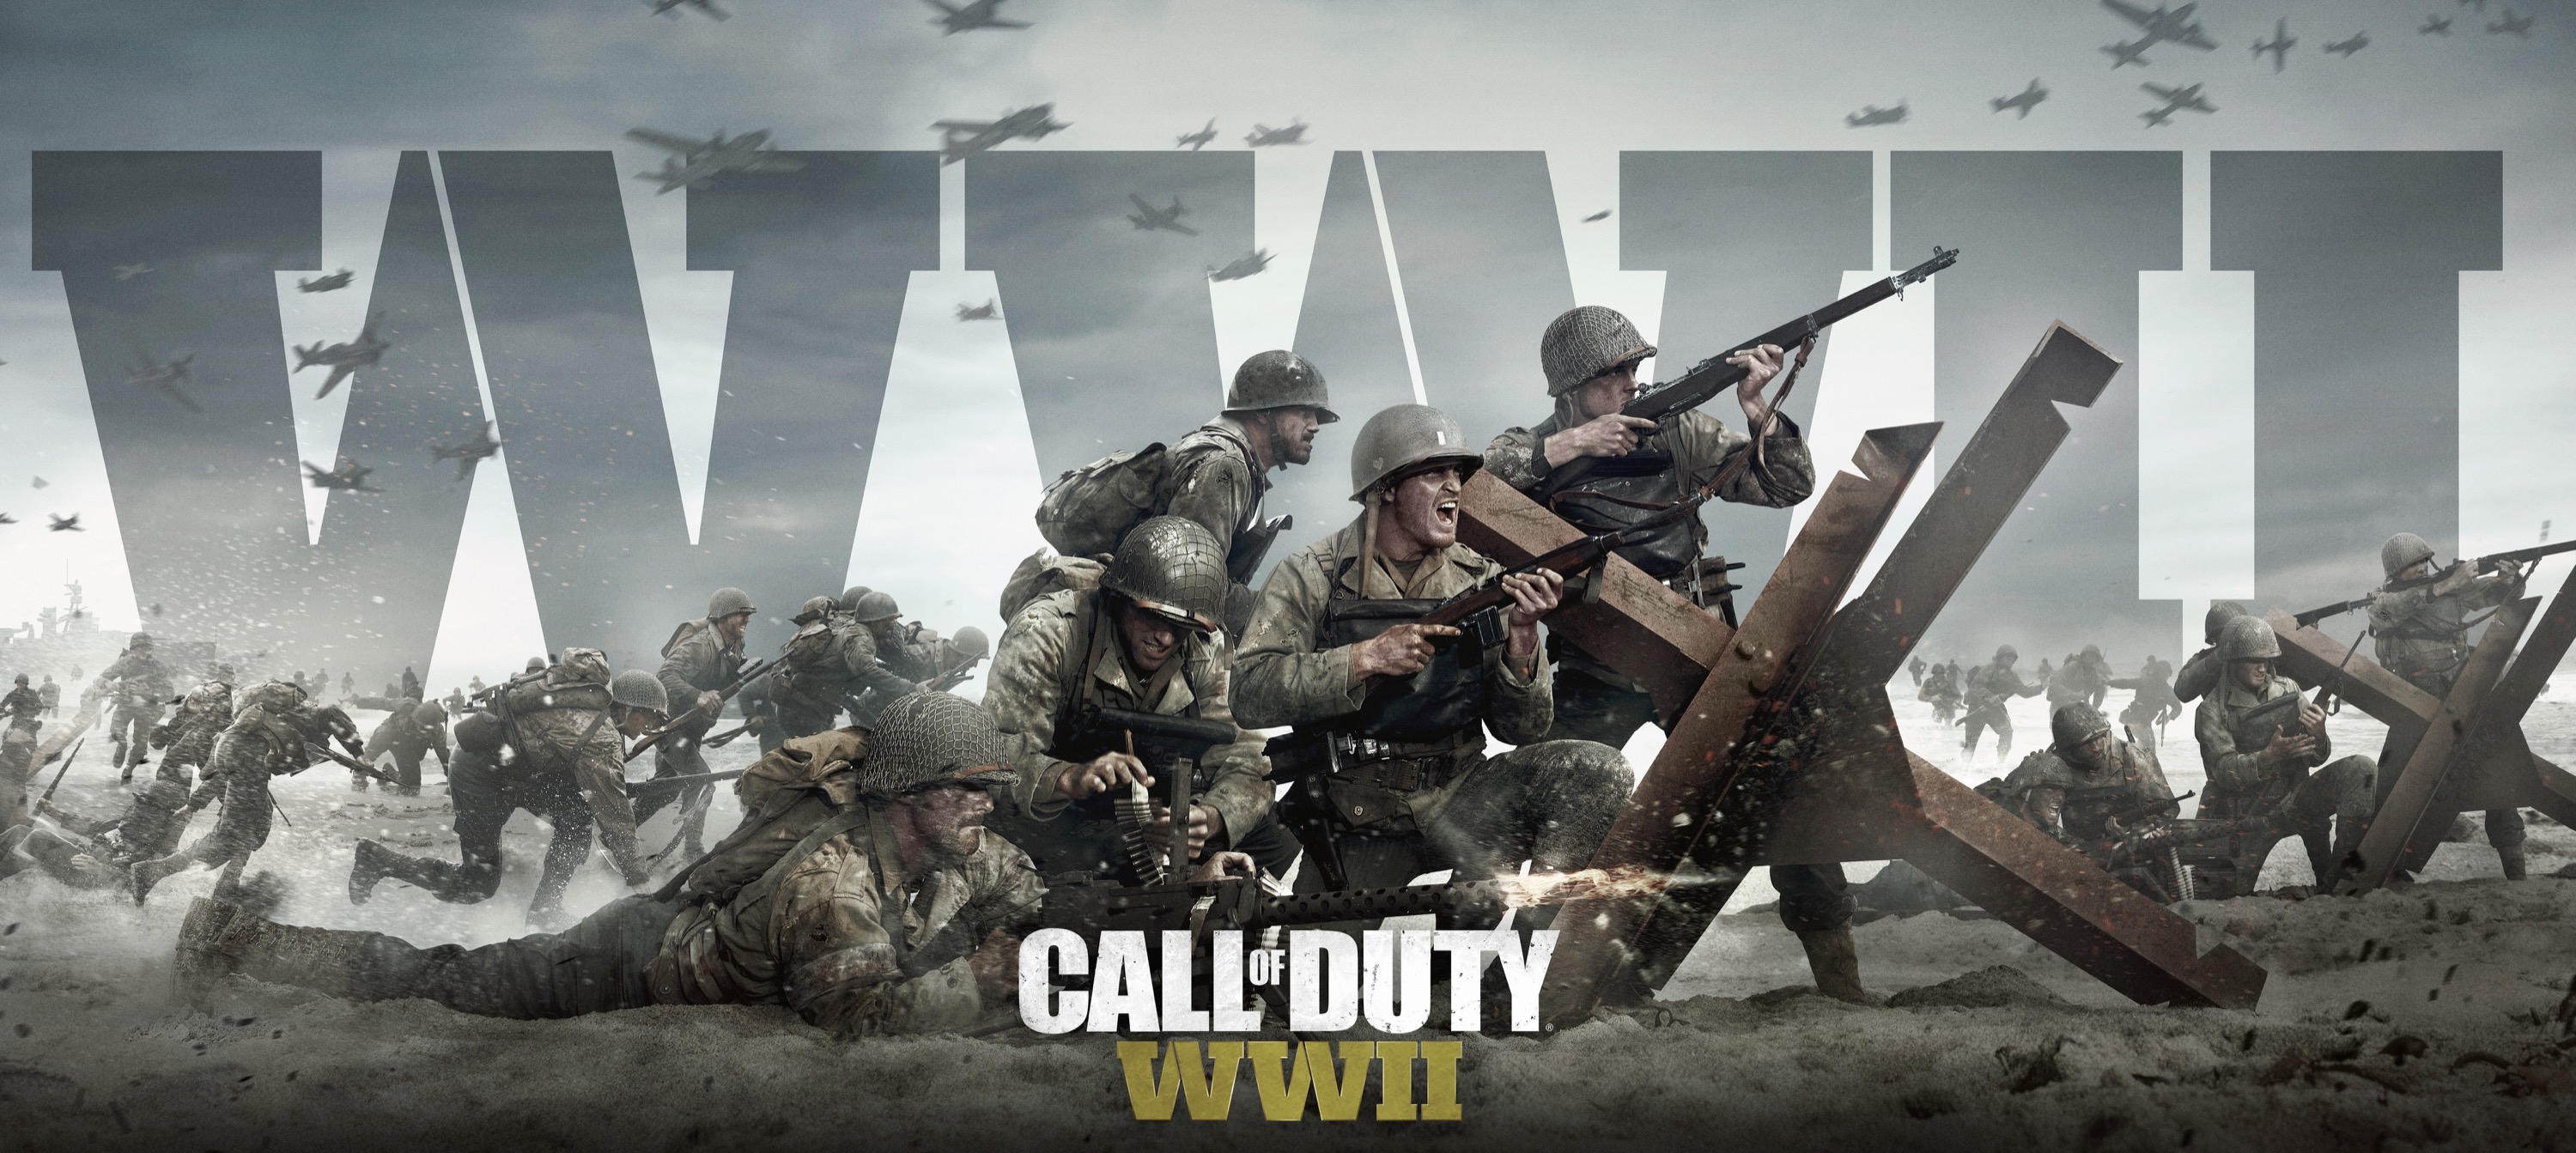 20+ Call of Duty: WWII HD Wallpapers and Backgrounds